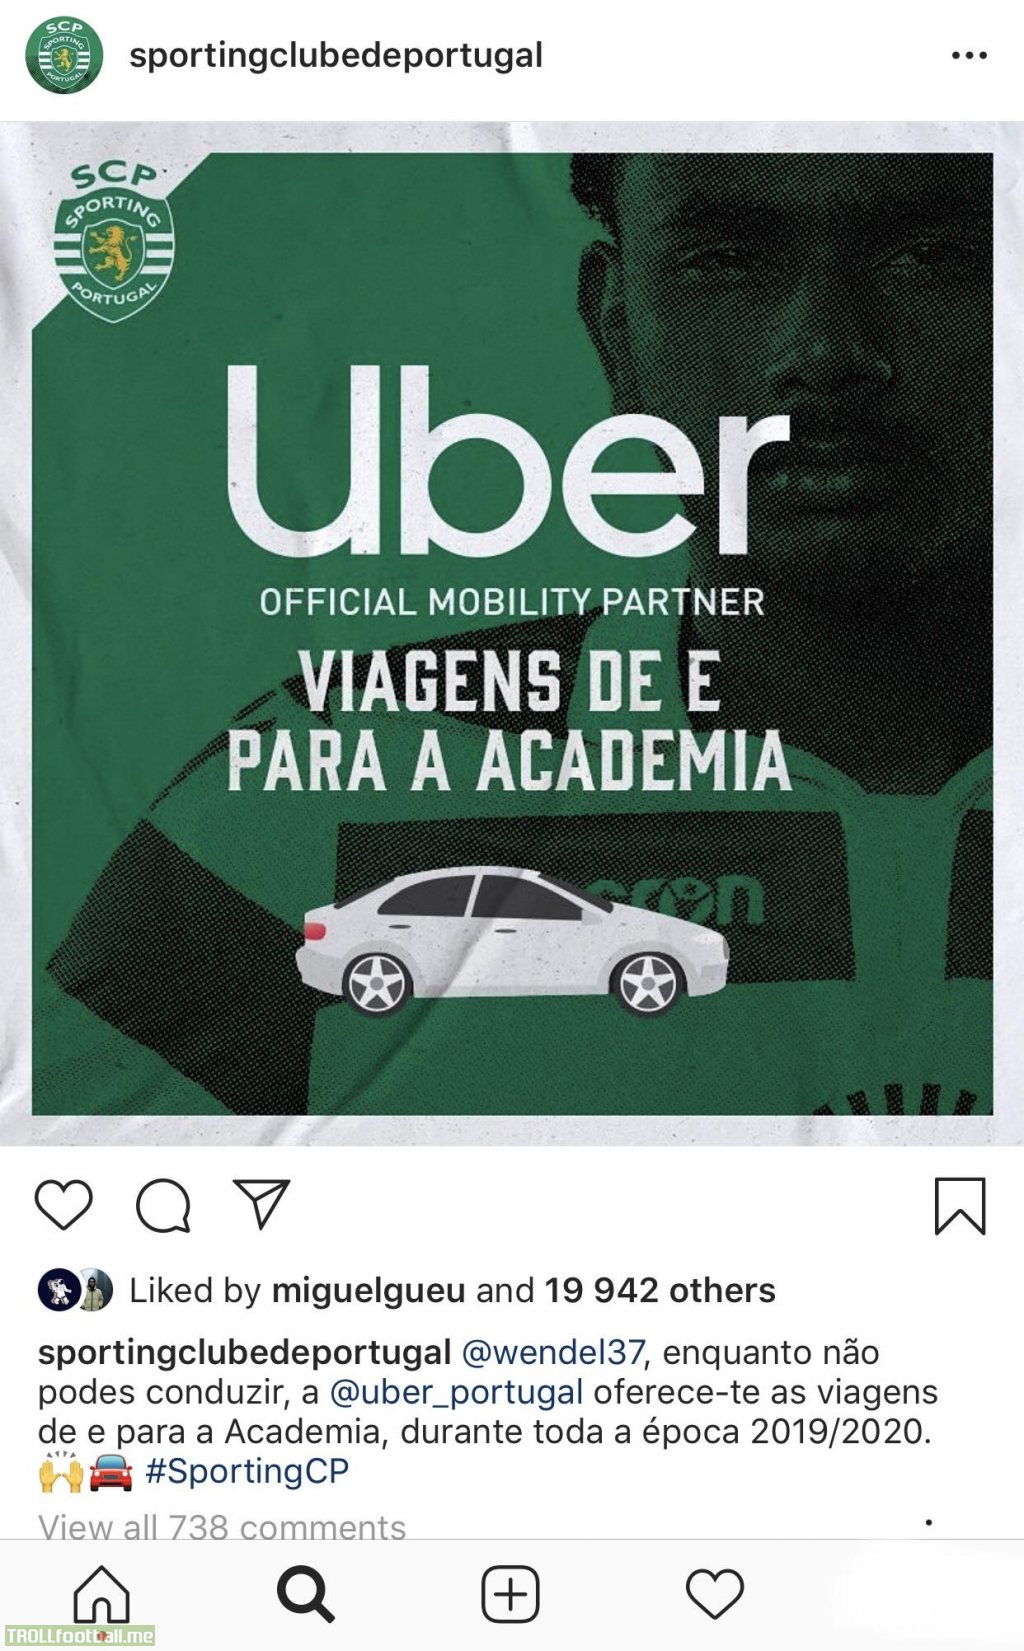 After being arrested for driving without a drivers license 3 days away from a cup final, Wendel was offered free rides to the training ground by Uber, in a special partnership made with Sporting. www.instagram.com/p/Bx0IlSNn8o5/?igshid=ni5jol8yng65